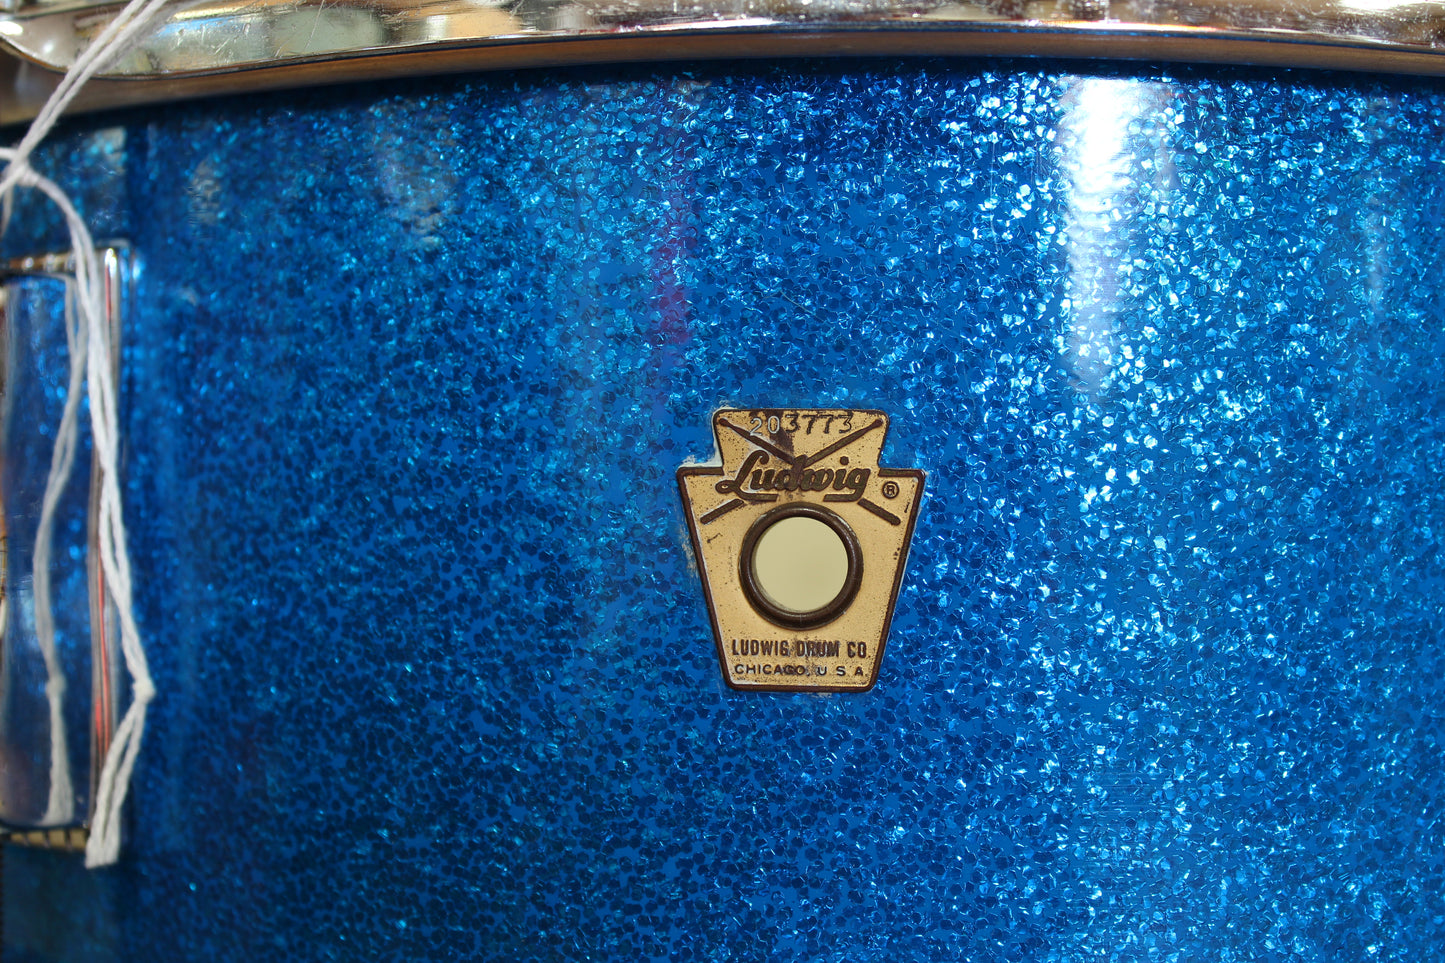 1965 Ludwig 5"x14" Pioneer Snare Drum in Blue Sparkle